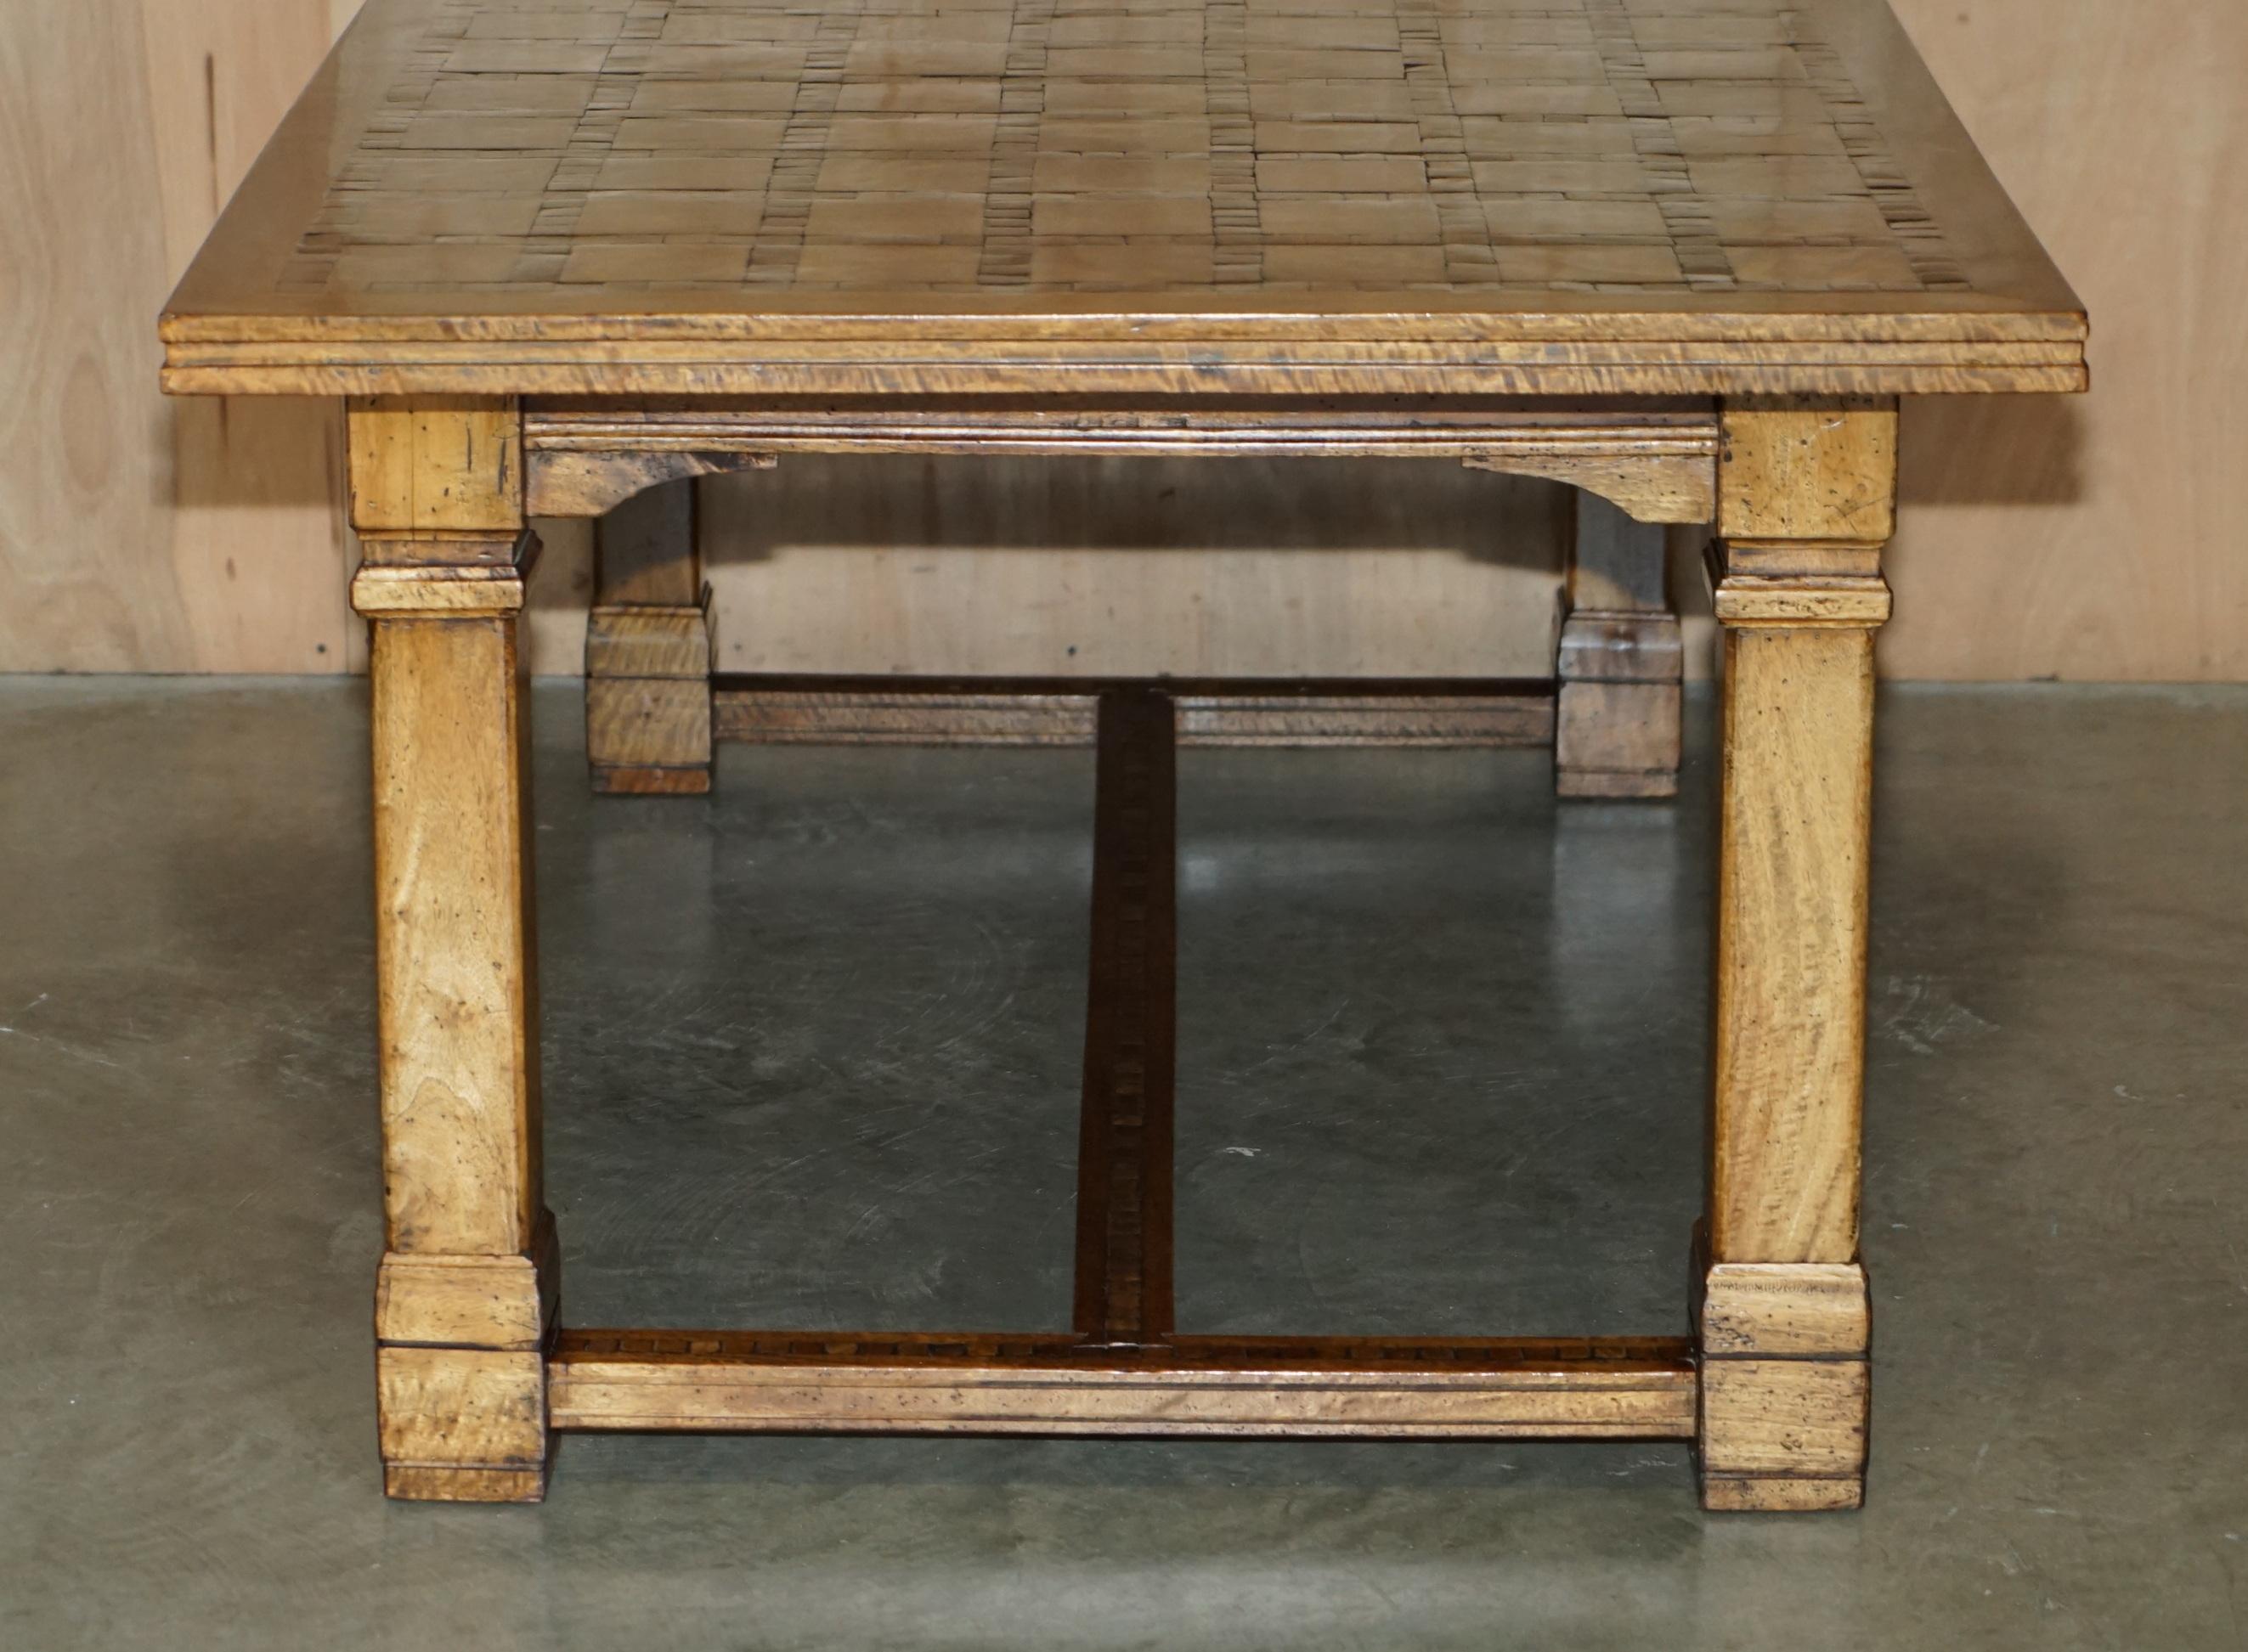 EXQUISITE ViNTAGE OYSTER VENEER & PARQUETRY INLAID REFECTORY DINING TABLE For Sale 13